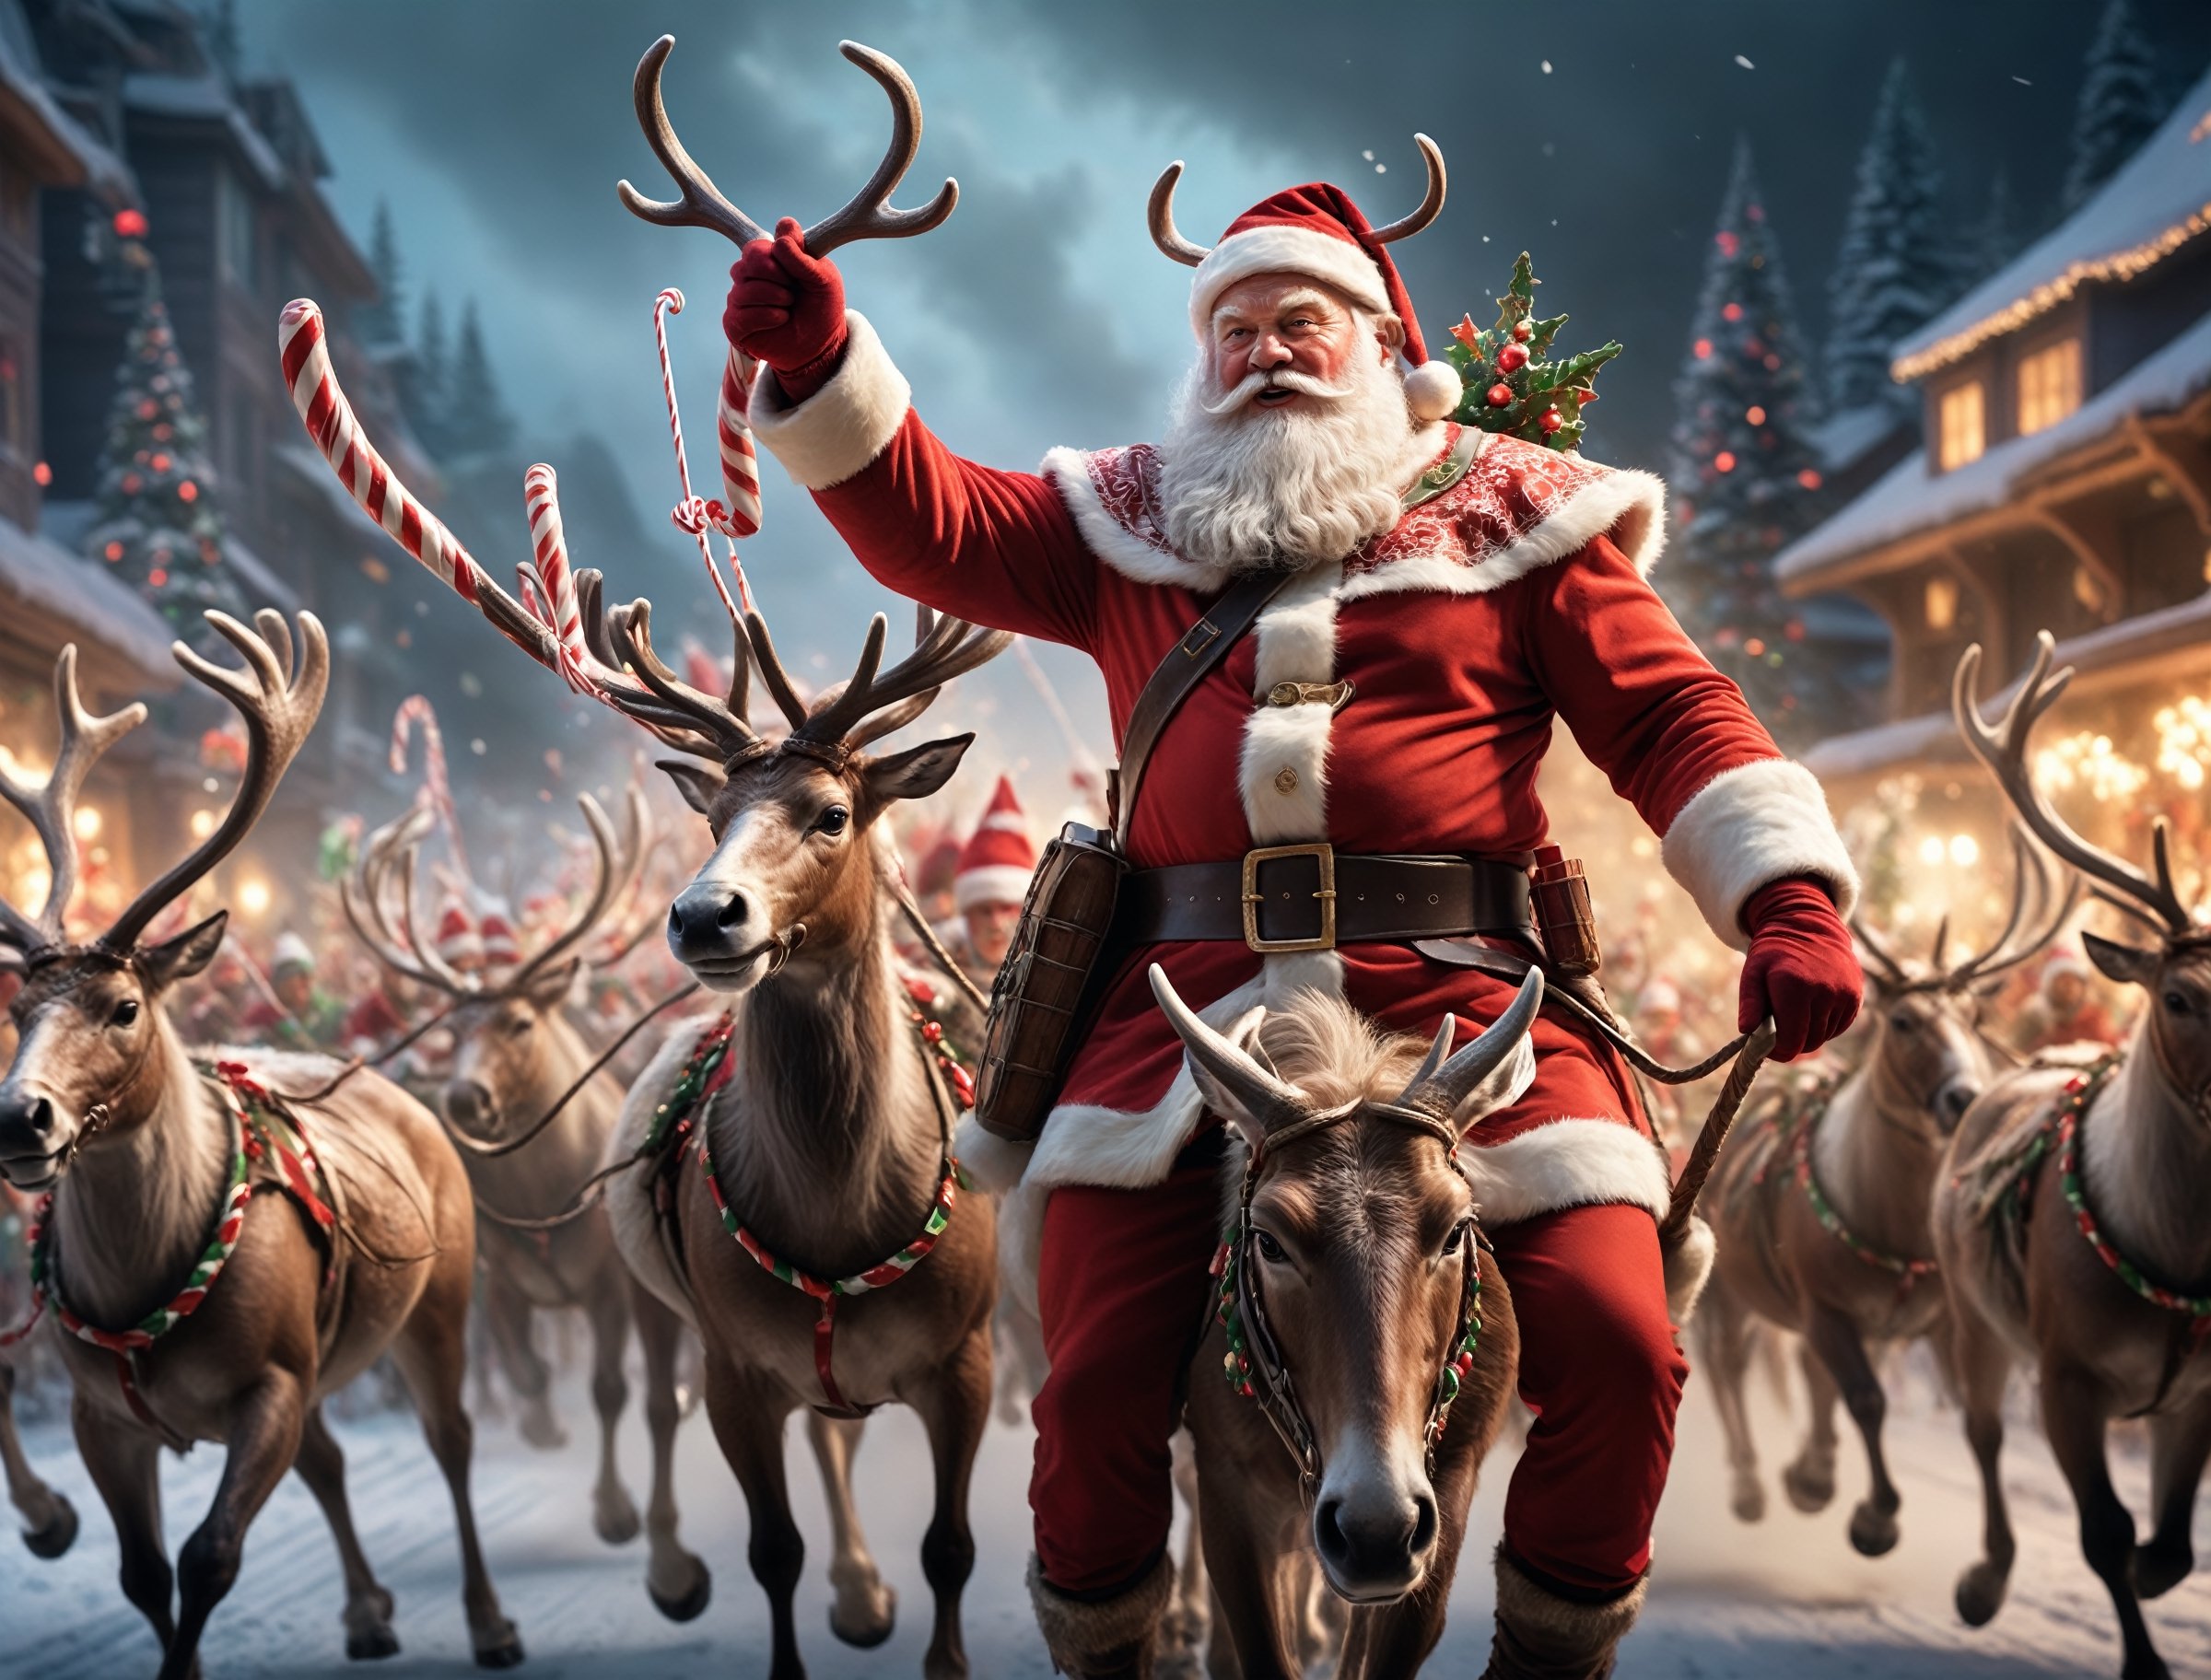 candid 16k photo, Santa Claus is a jolly muscular warrior leading his army of elves in an epic reindeer cavalry charge. Santa carries a candy cane themed spear in his right hand and a shield in his left. He rides Rudolph, a gigantic reindeer the size of a war horse. detailed face, detailed eyes, wide-angle shot, dramatic lighting, cinematic colors, cinema quality, Leica SL-2, 24mm prime lens, f/4, film grain, aw0k magnstyle